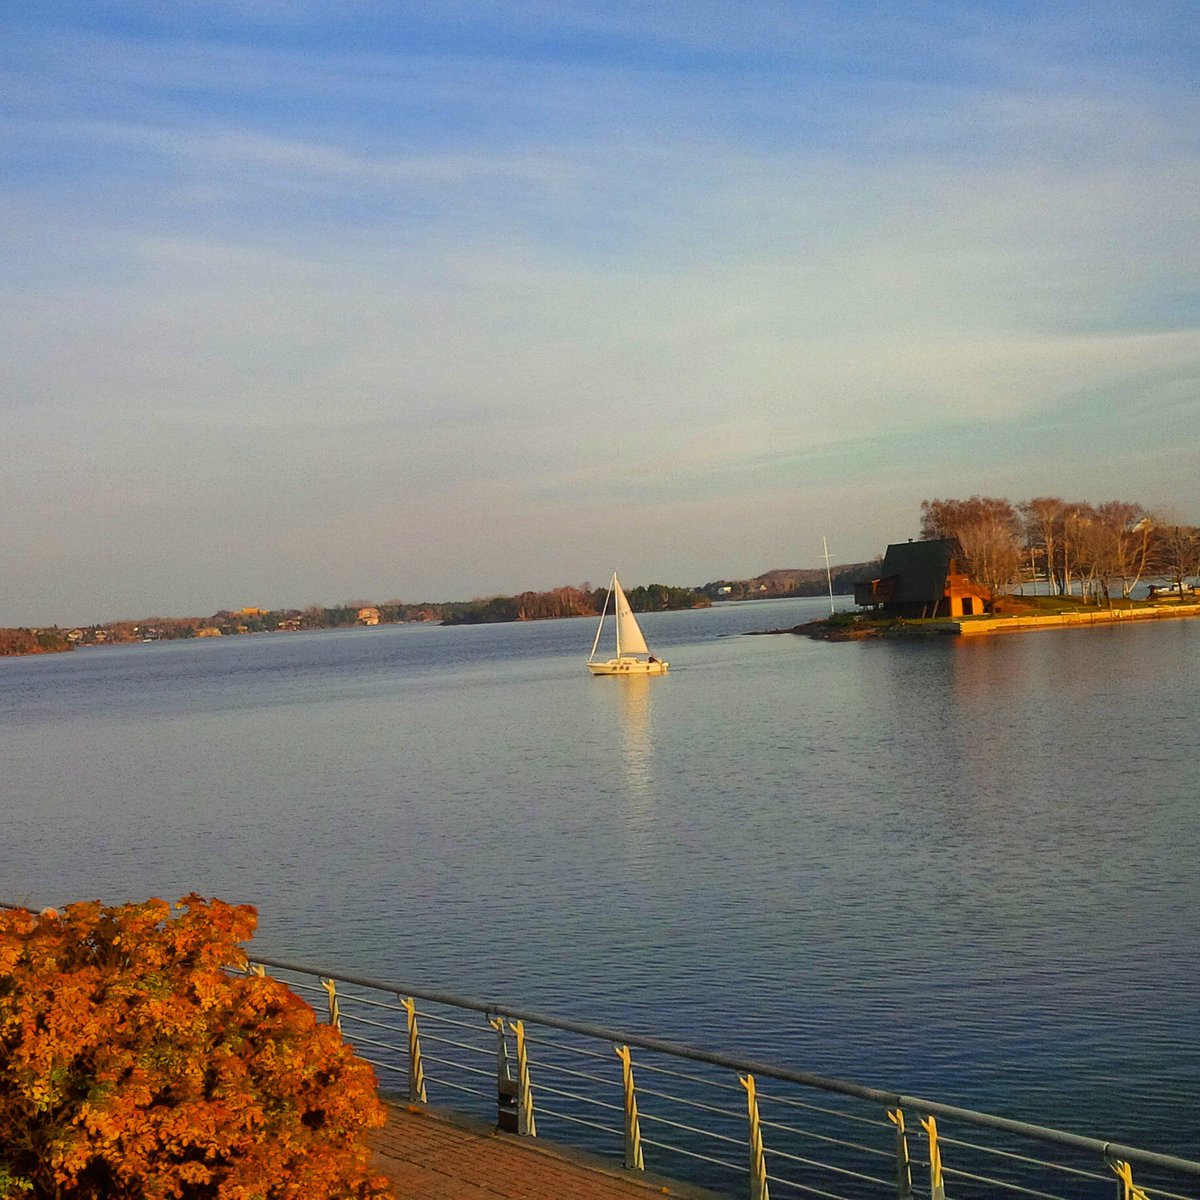 November 18th. There's a sailboat on the lake. #paradoxical #autumn #warmtemperatures #sunny #ramseylake #cardio #boardwalk #fitness ⛵️️🍁🍂